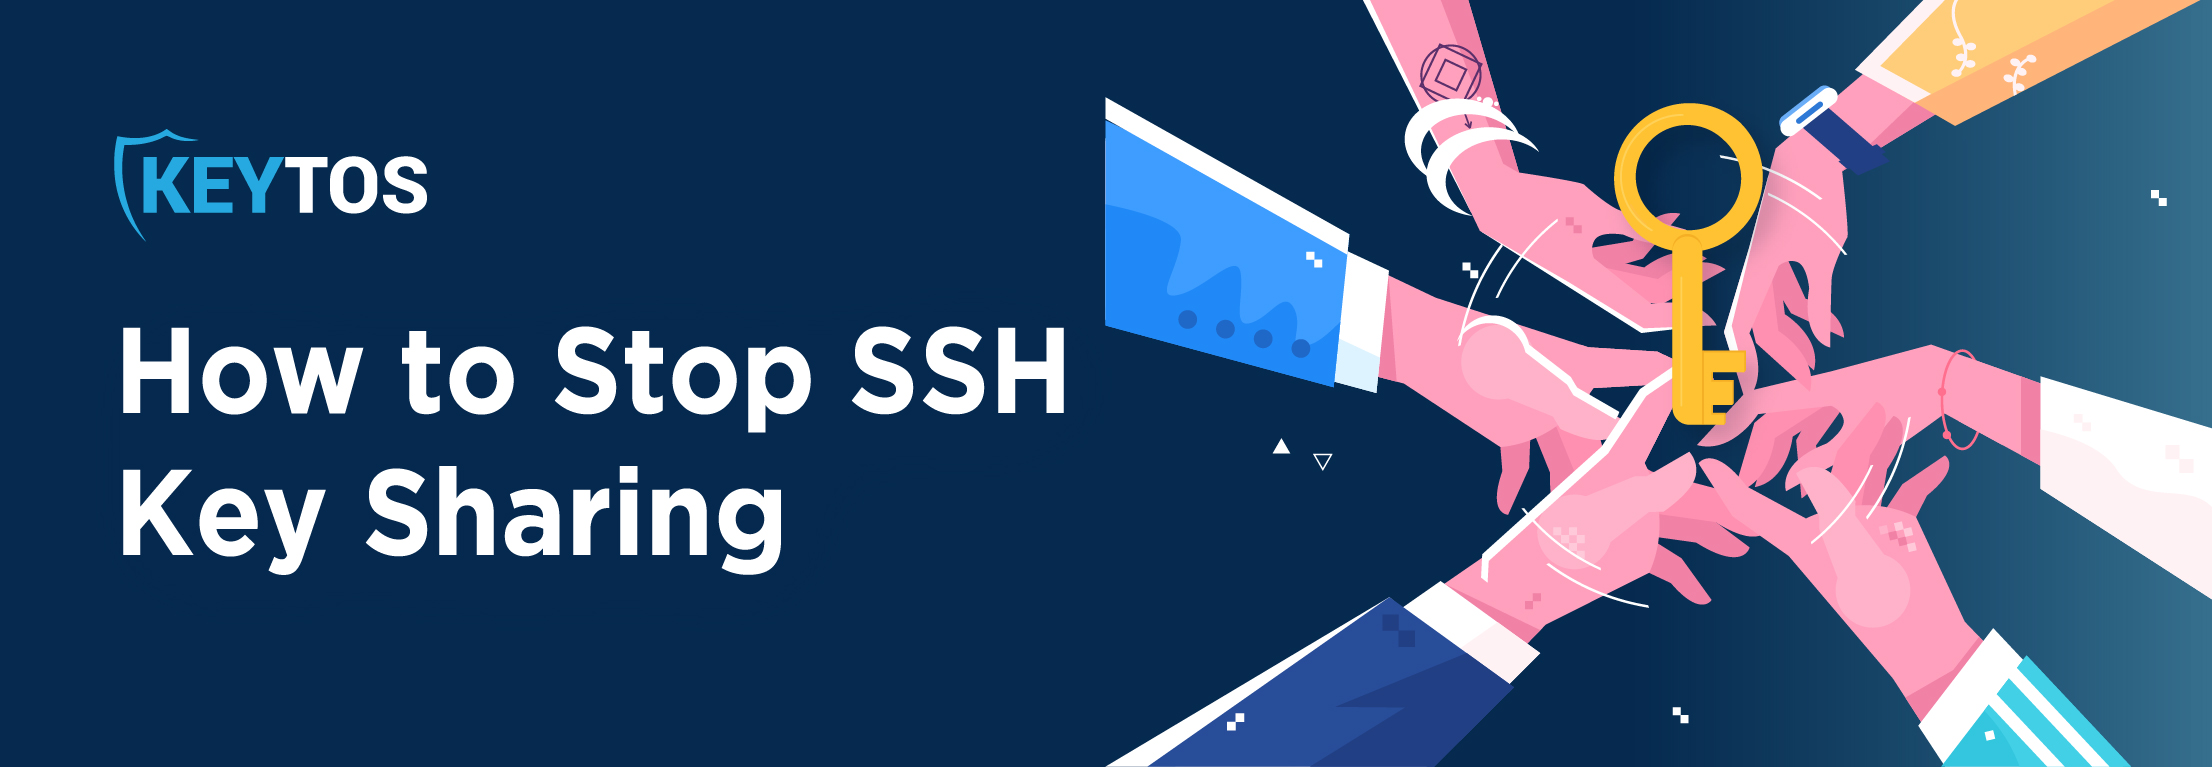 How to Stop SSH Key Sharing with SSO and SSH Certificates